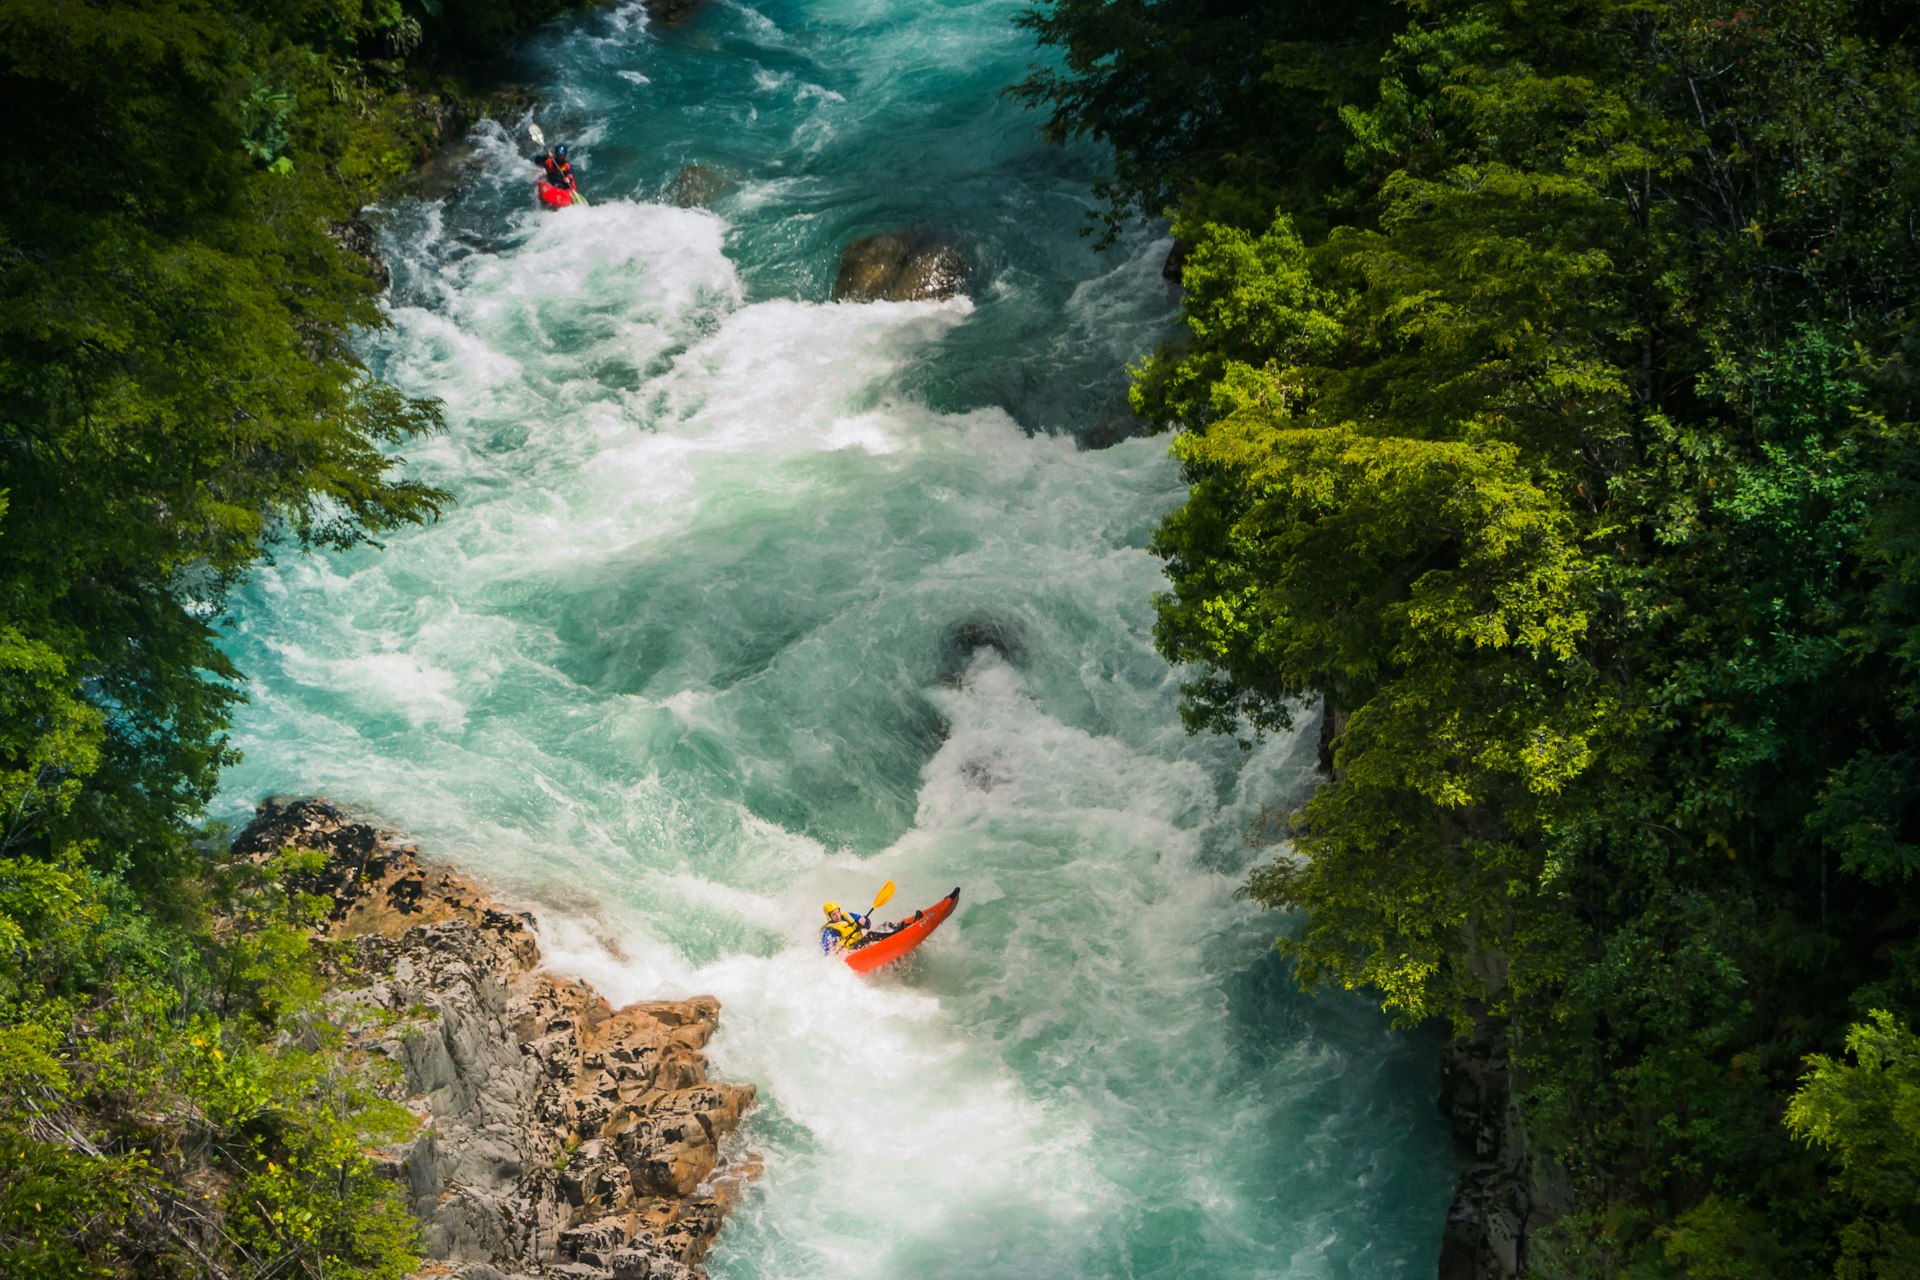 A rafter goes down white water rapids in a wide and furious river